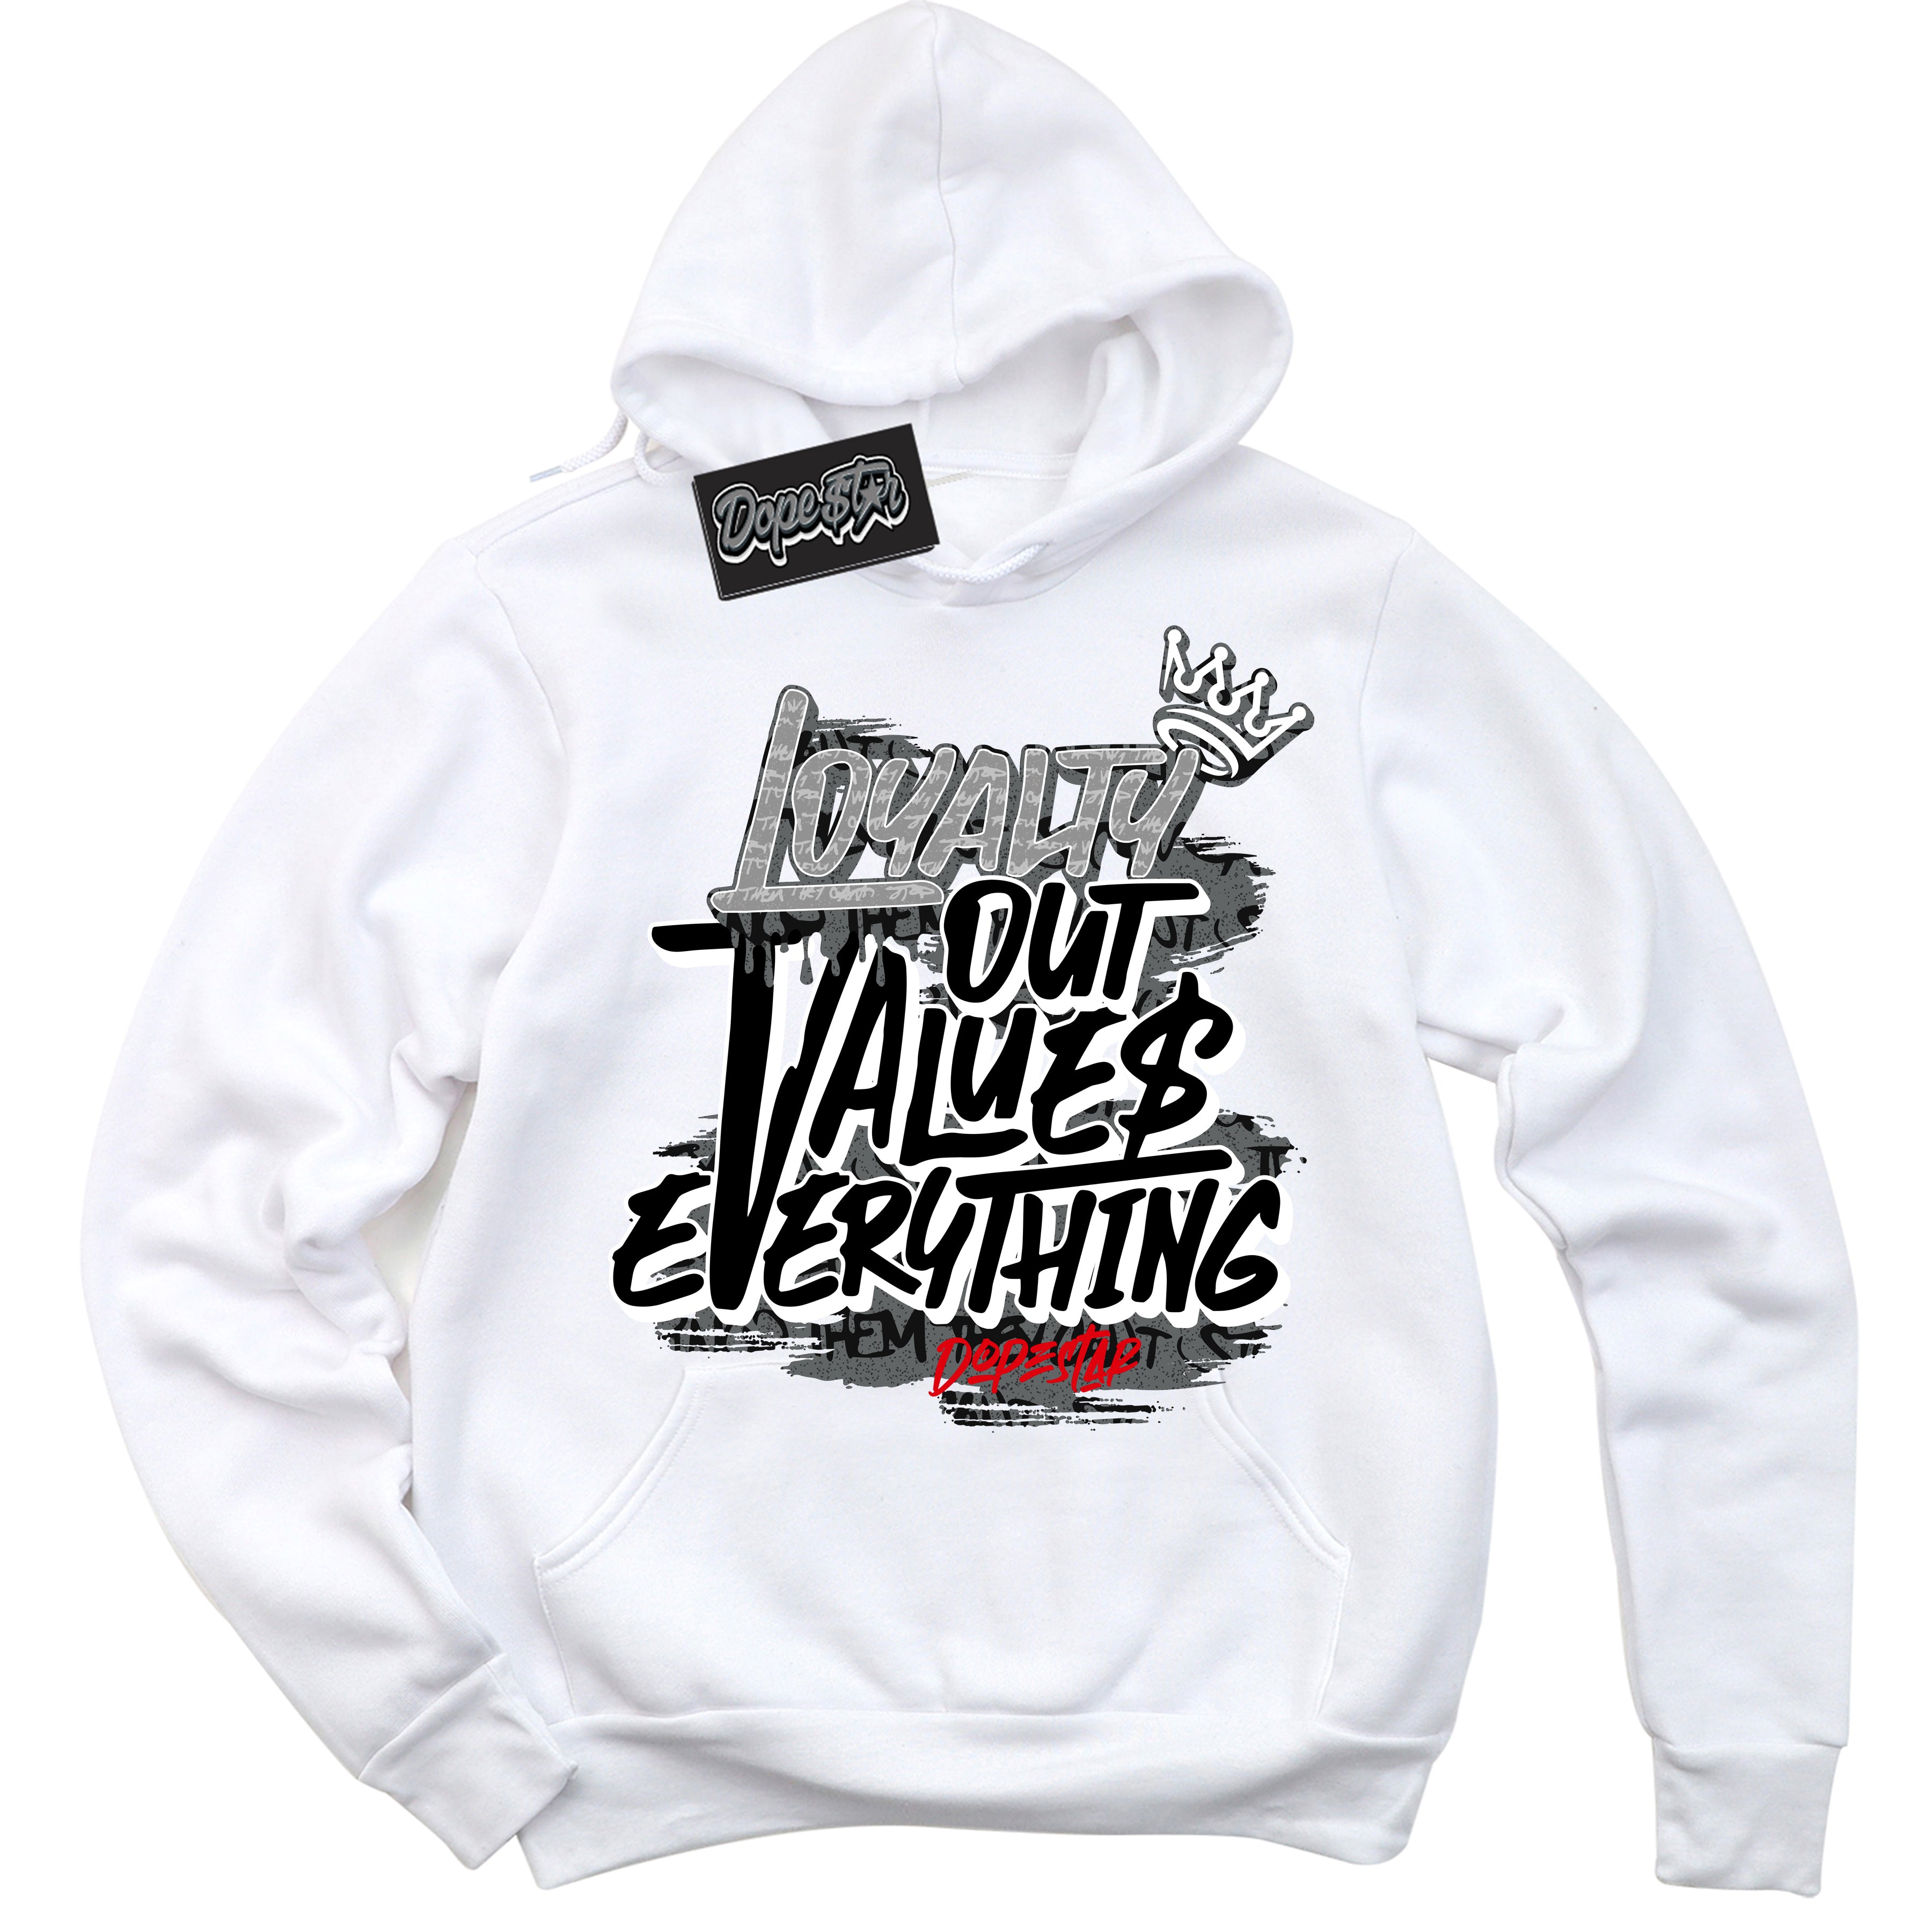 Cool White Hoodie with “ Loyalty Out Values Everything ”  design that Perfectly Matches Rebellionaire 1s Sneakers.